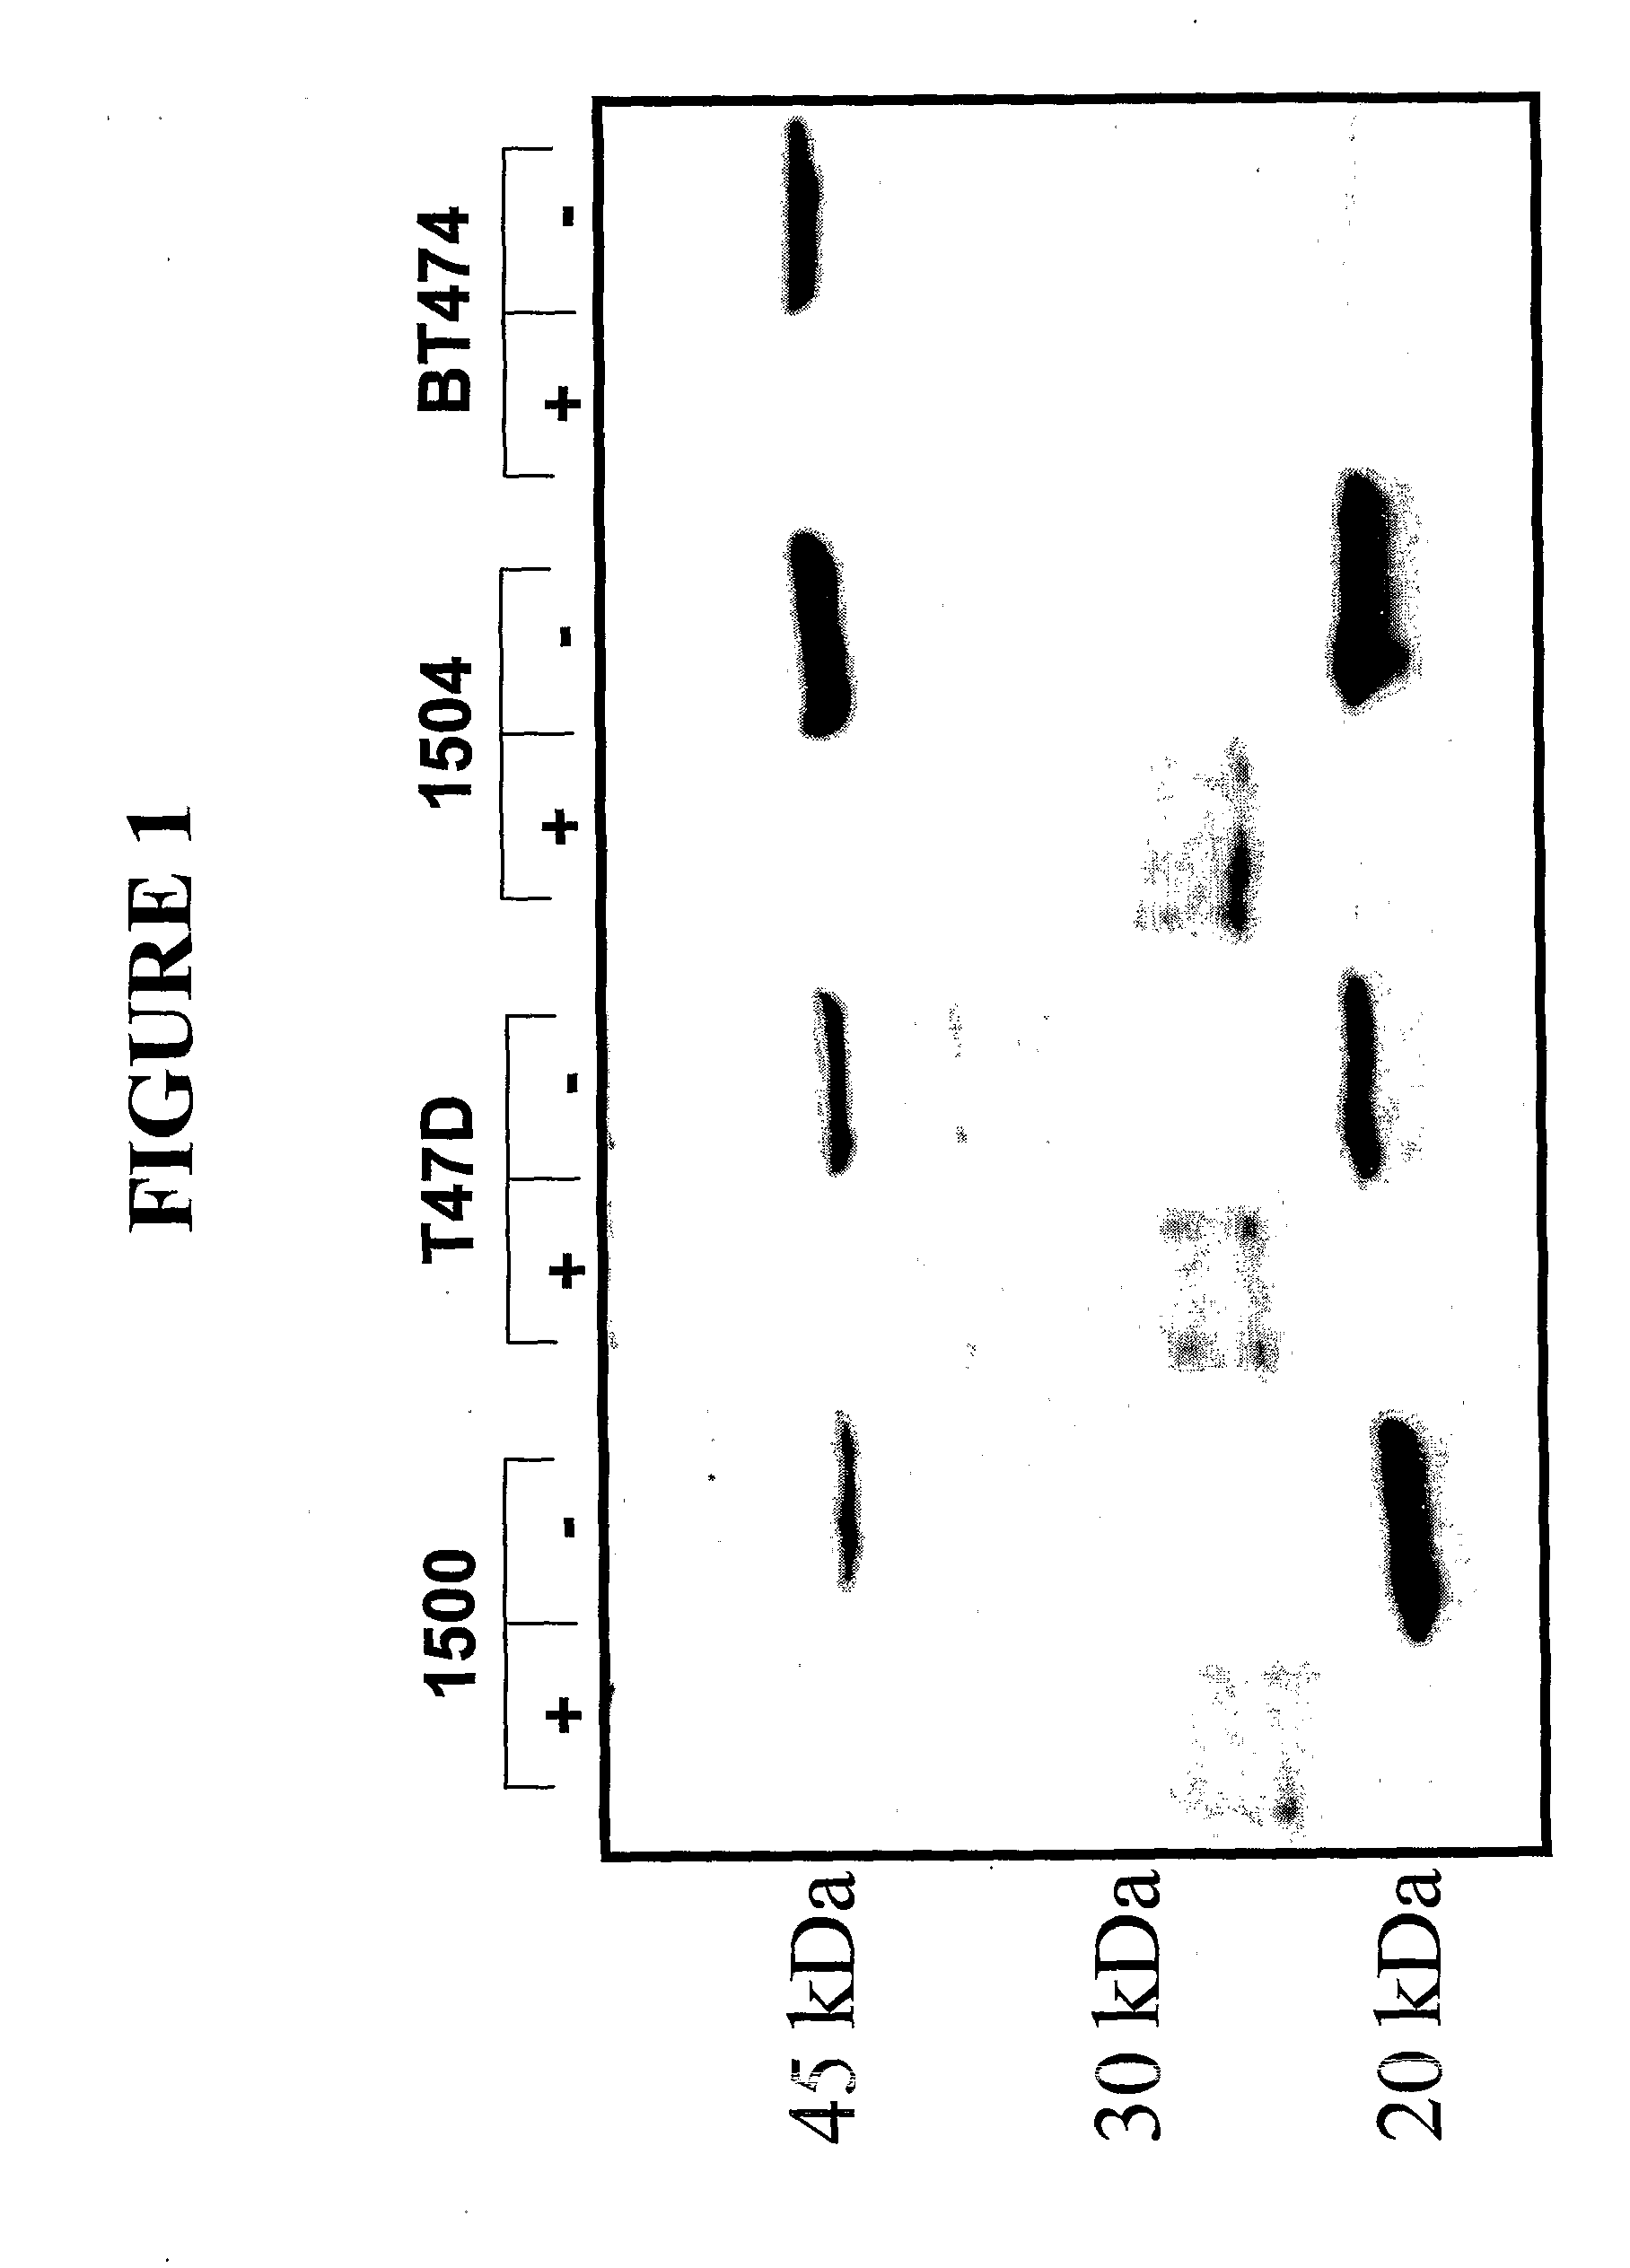 Methods for Diagnosis and Treatment of Cancer